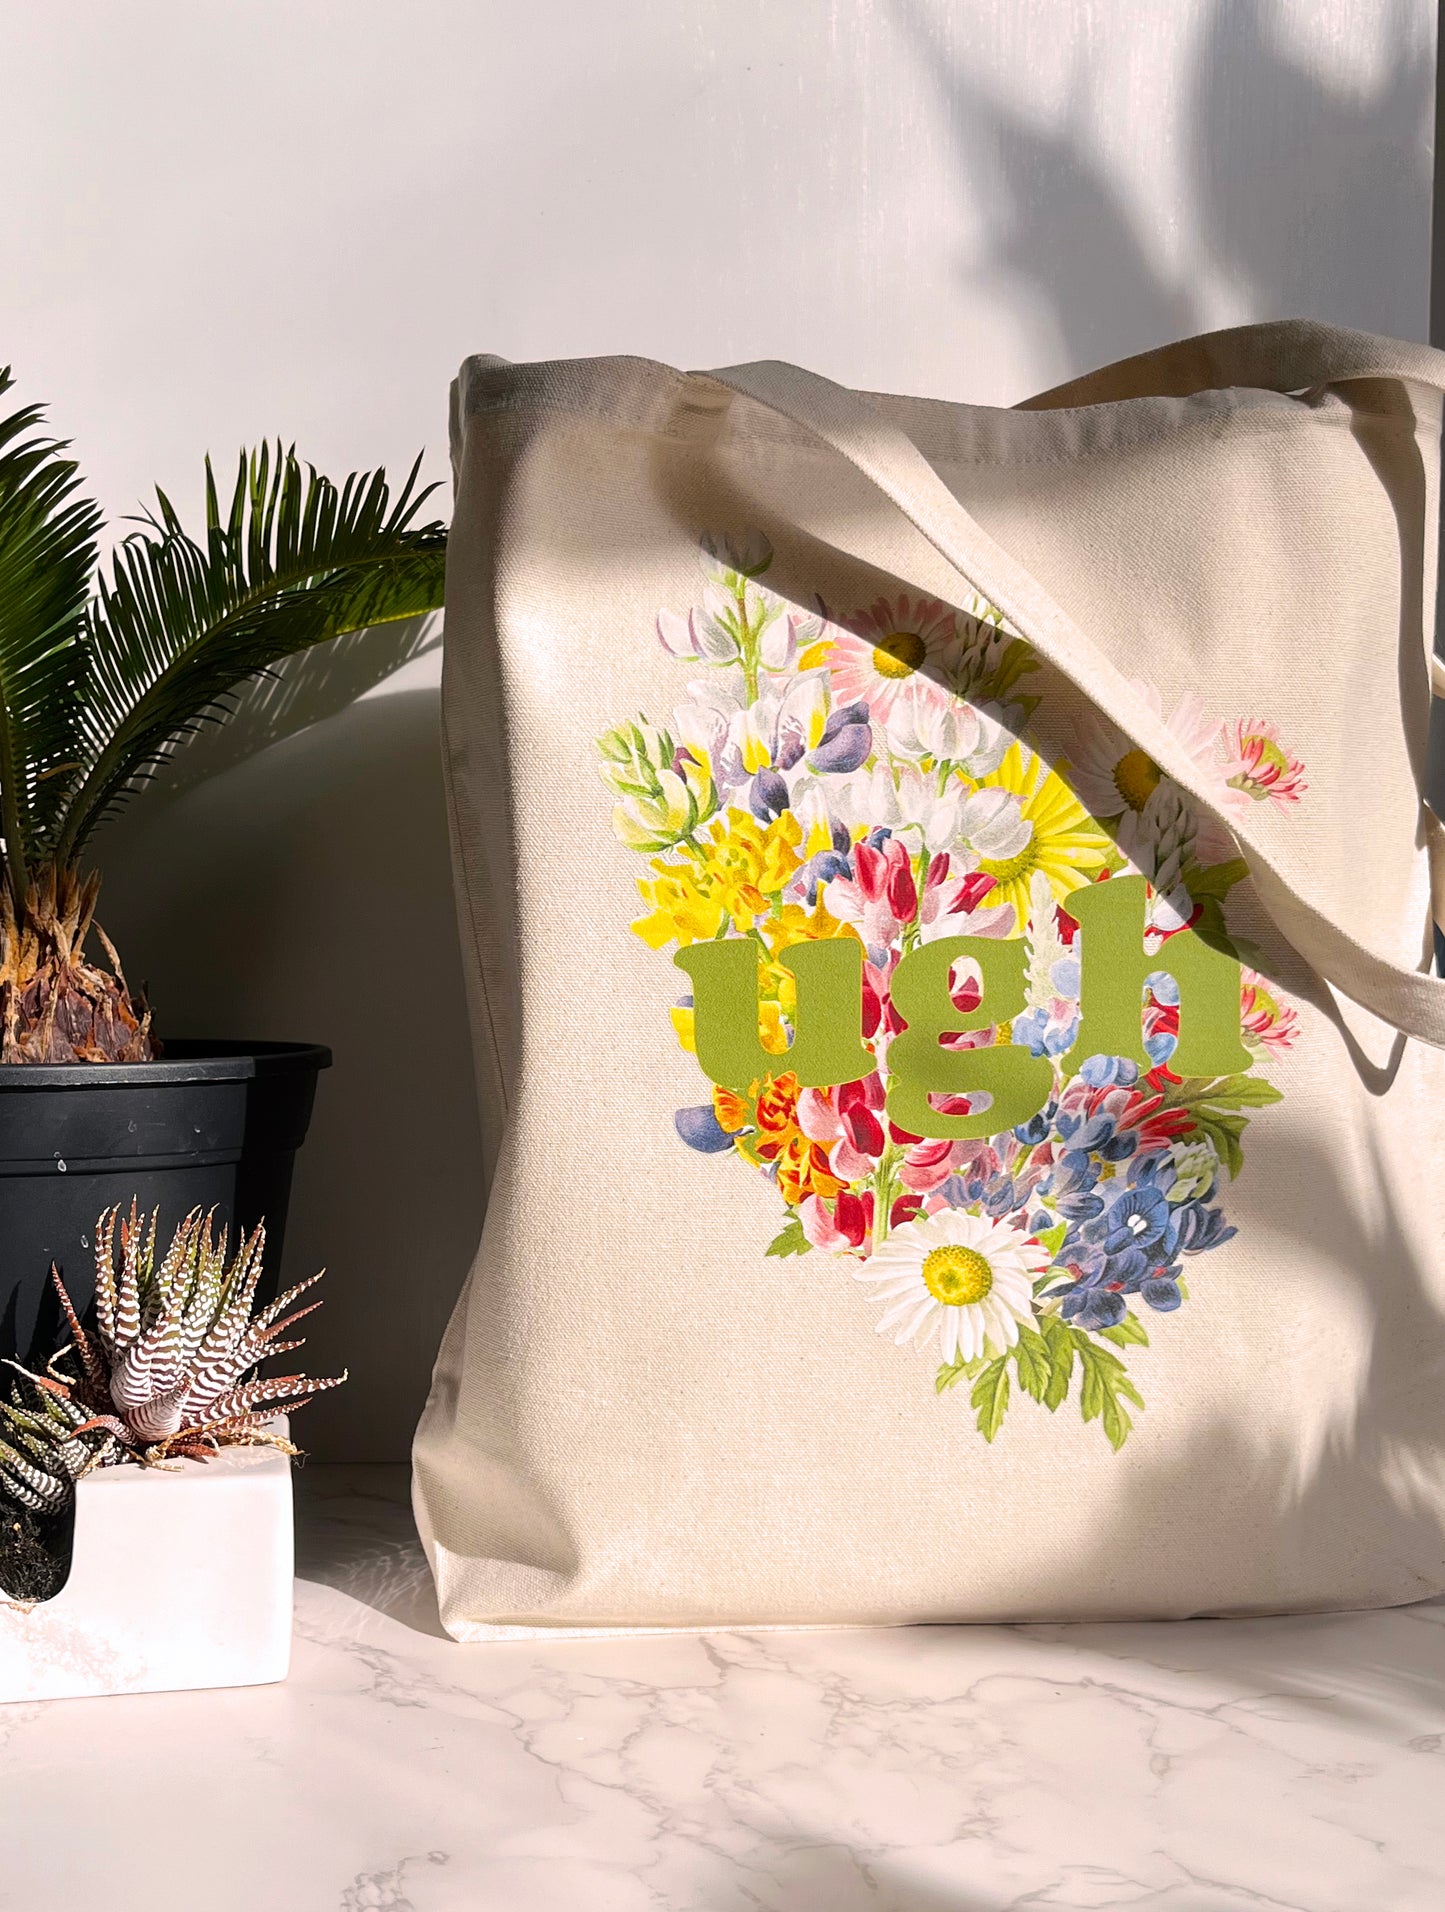 funny tote bag purse cute shopping bag reusable tote canvas for grocery ugh with flowers fun book bag beach tote coin laundry ugh with flowers retro pastel coin laundry